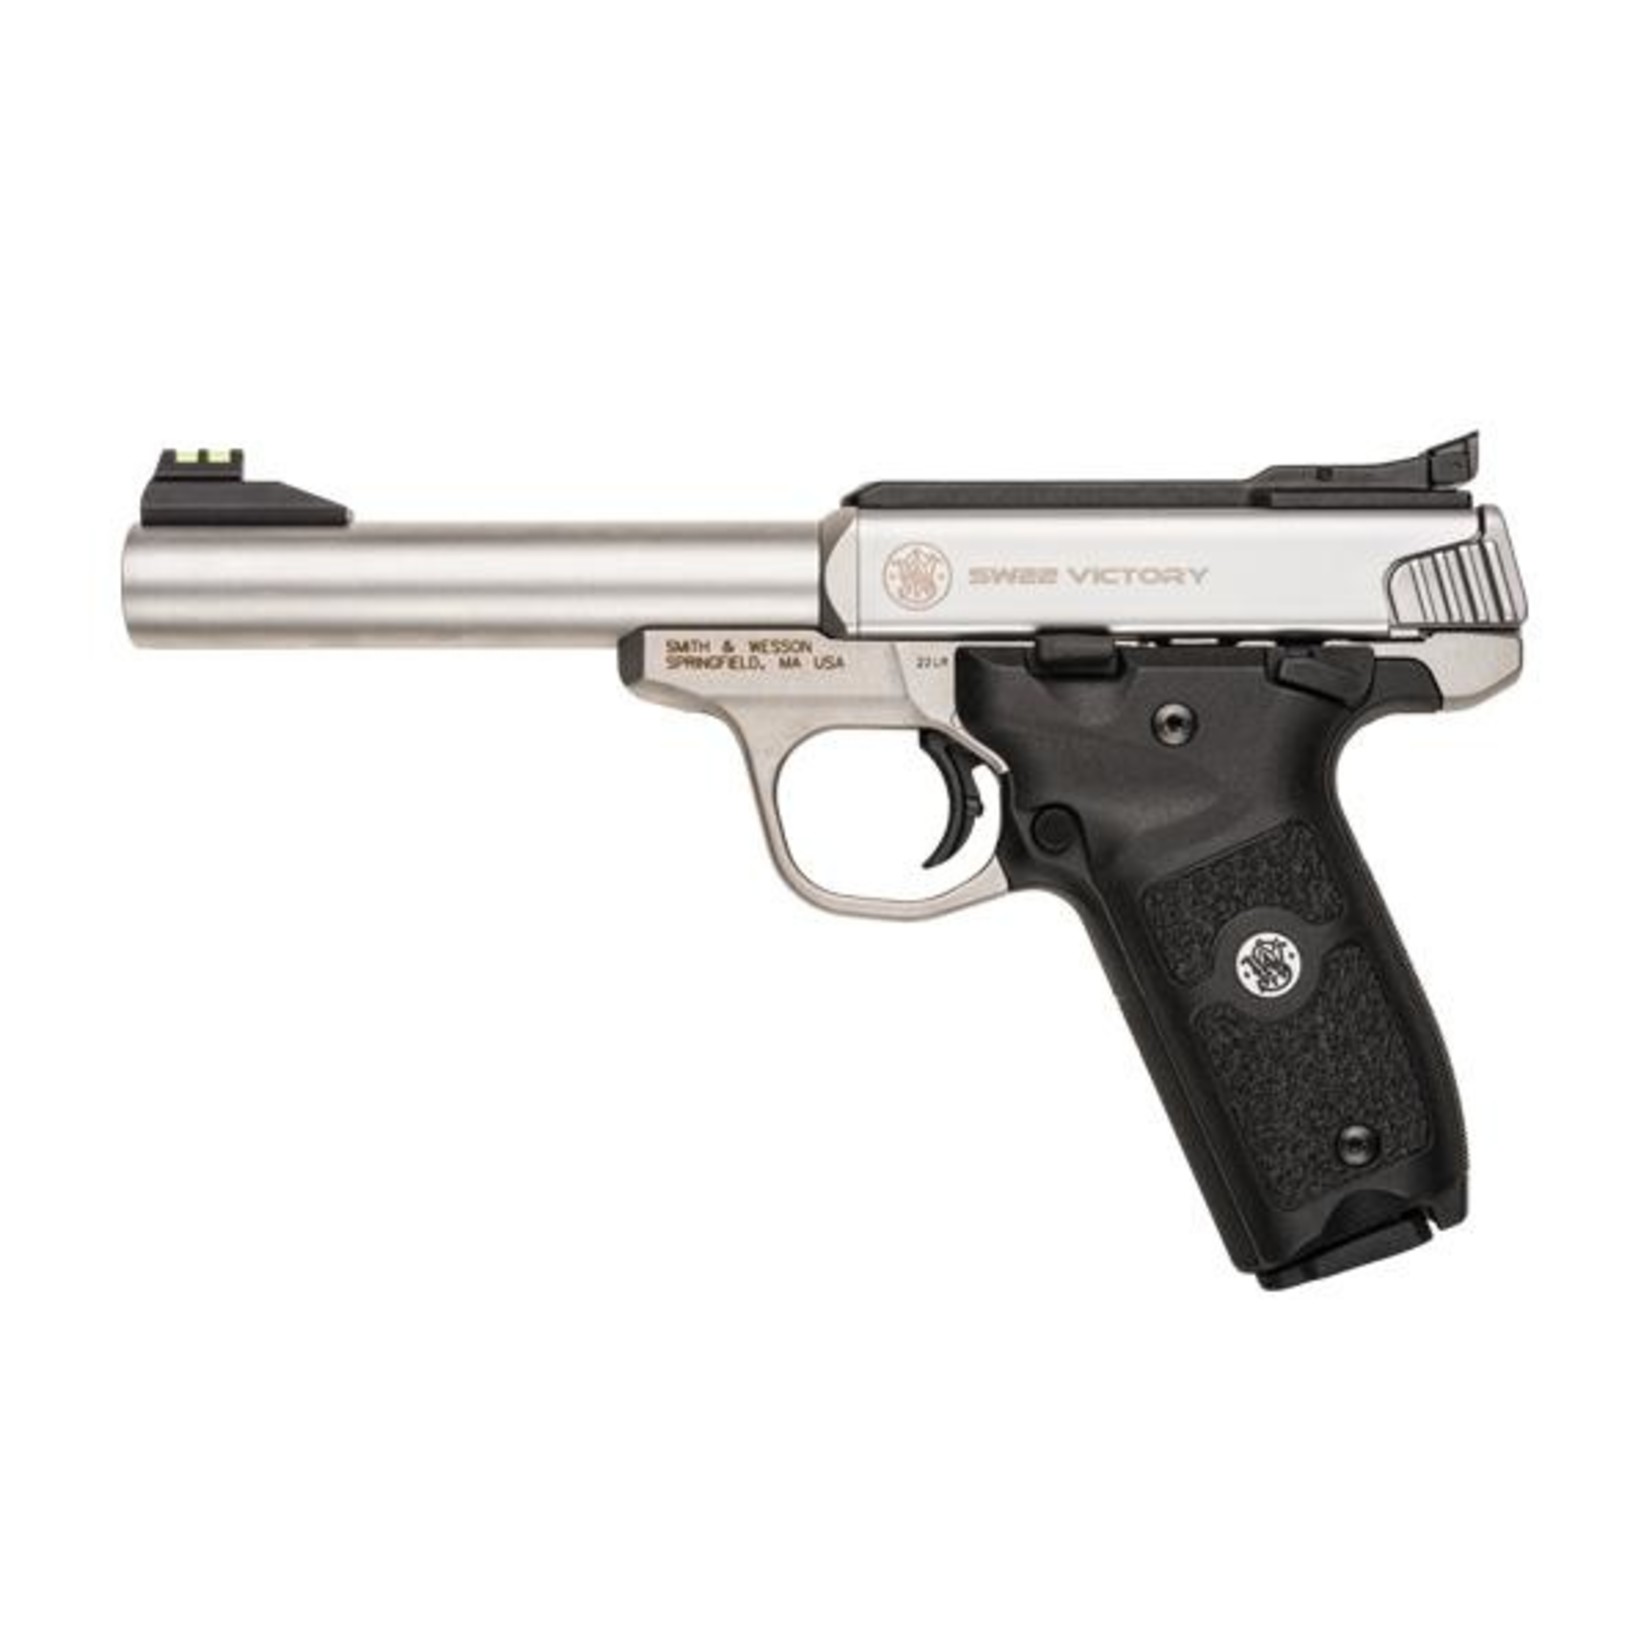 Smith & Wesson Pre Owned Smith & Wesson 22lr SW22 Victory Handgun 140mm - 1 Mag